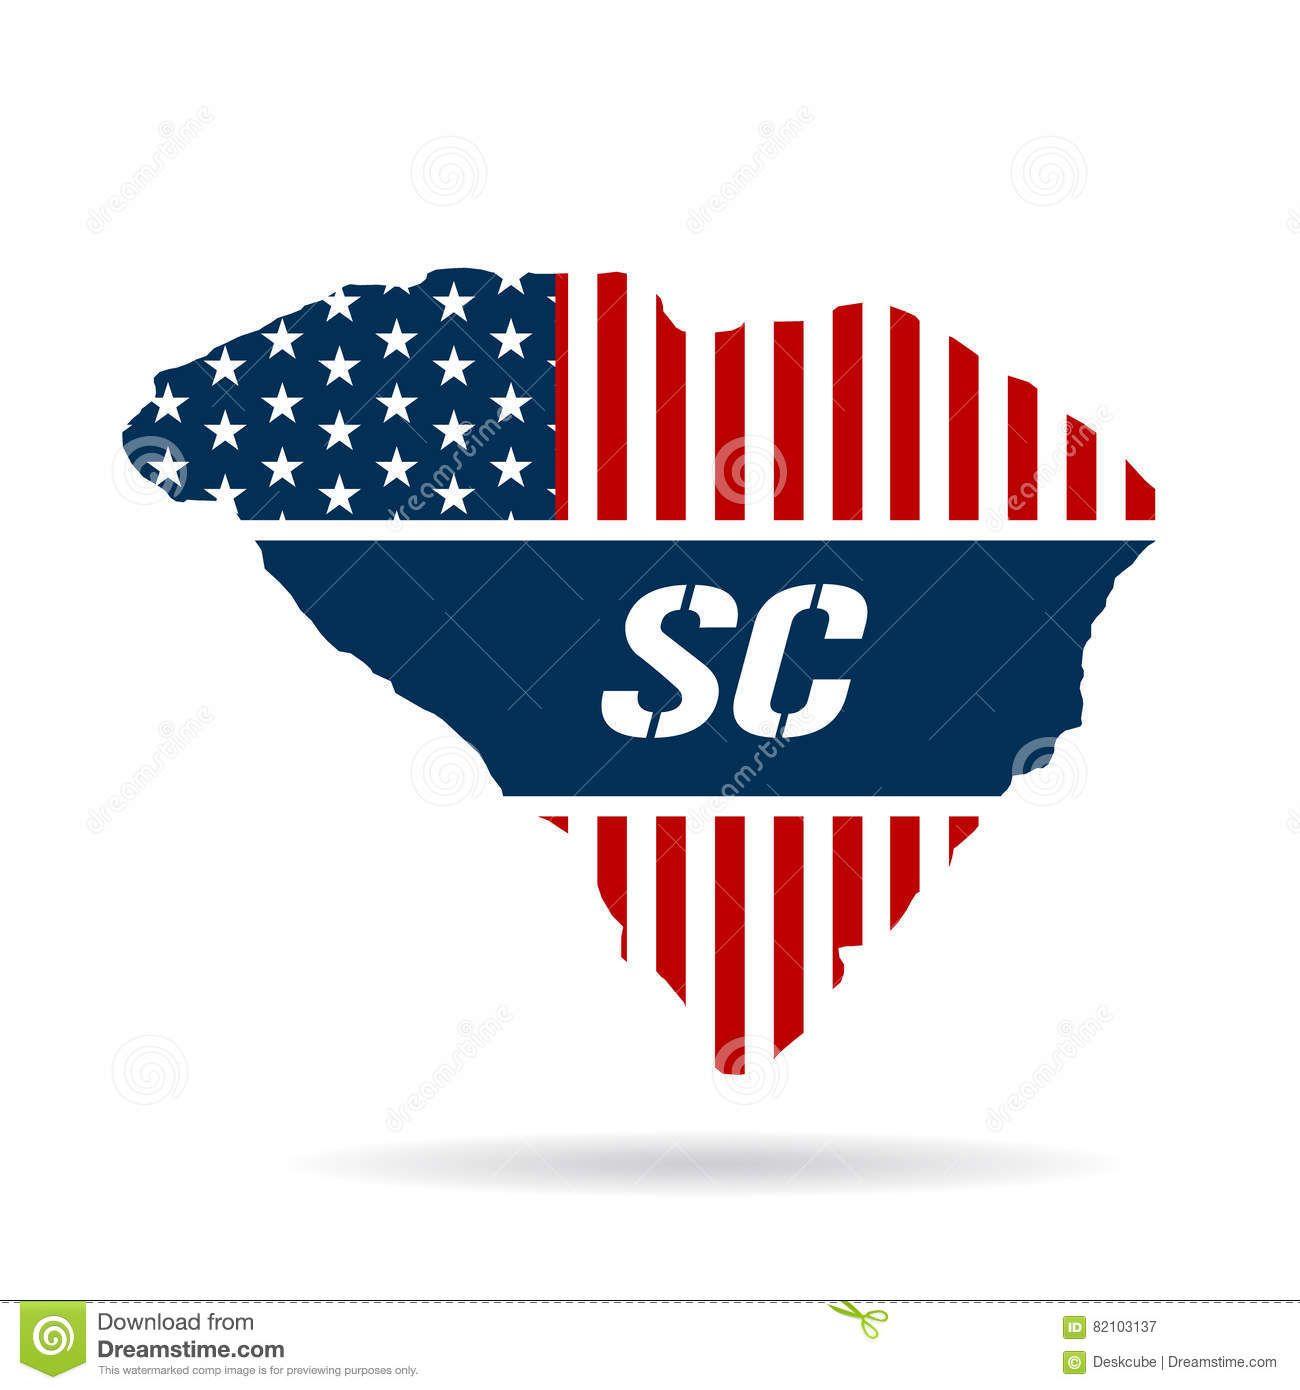 White and Blue People Logo - South Carolina Red, White and Blue Illustration | Logo in Dreamstime ...